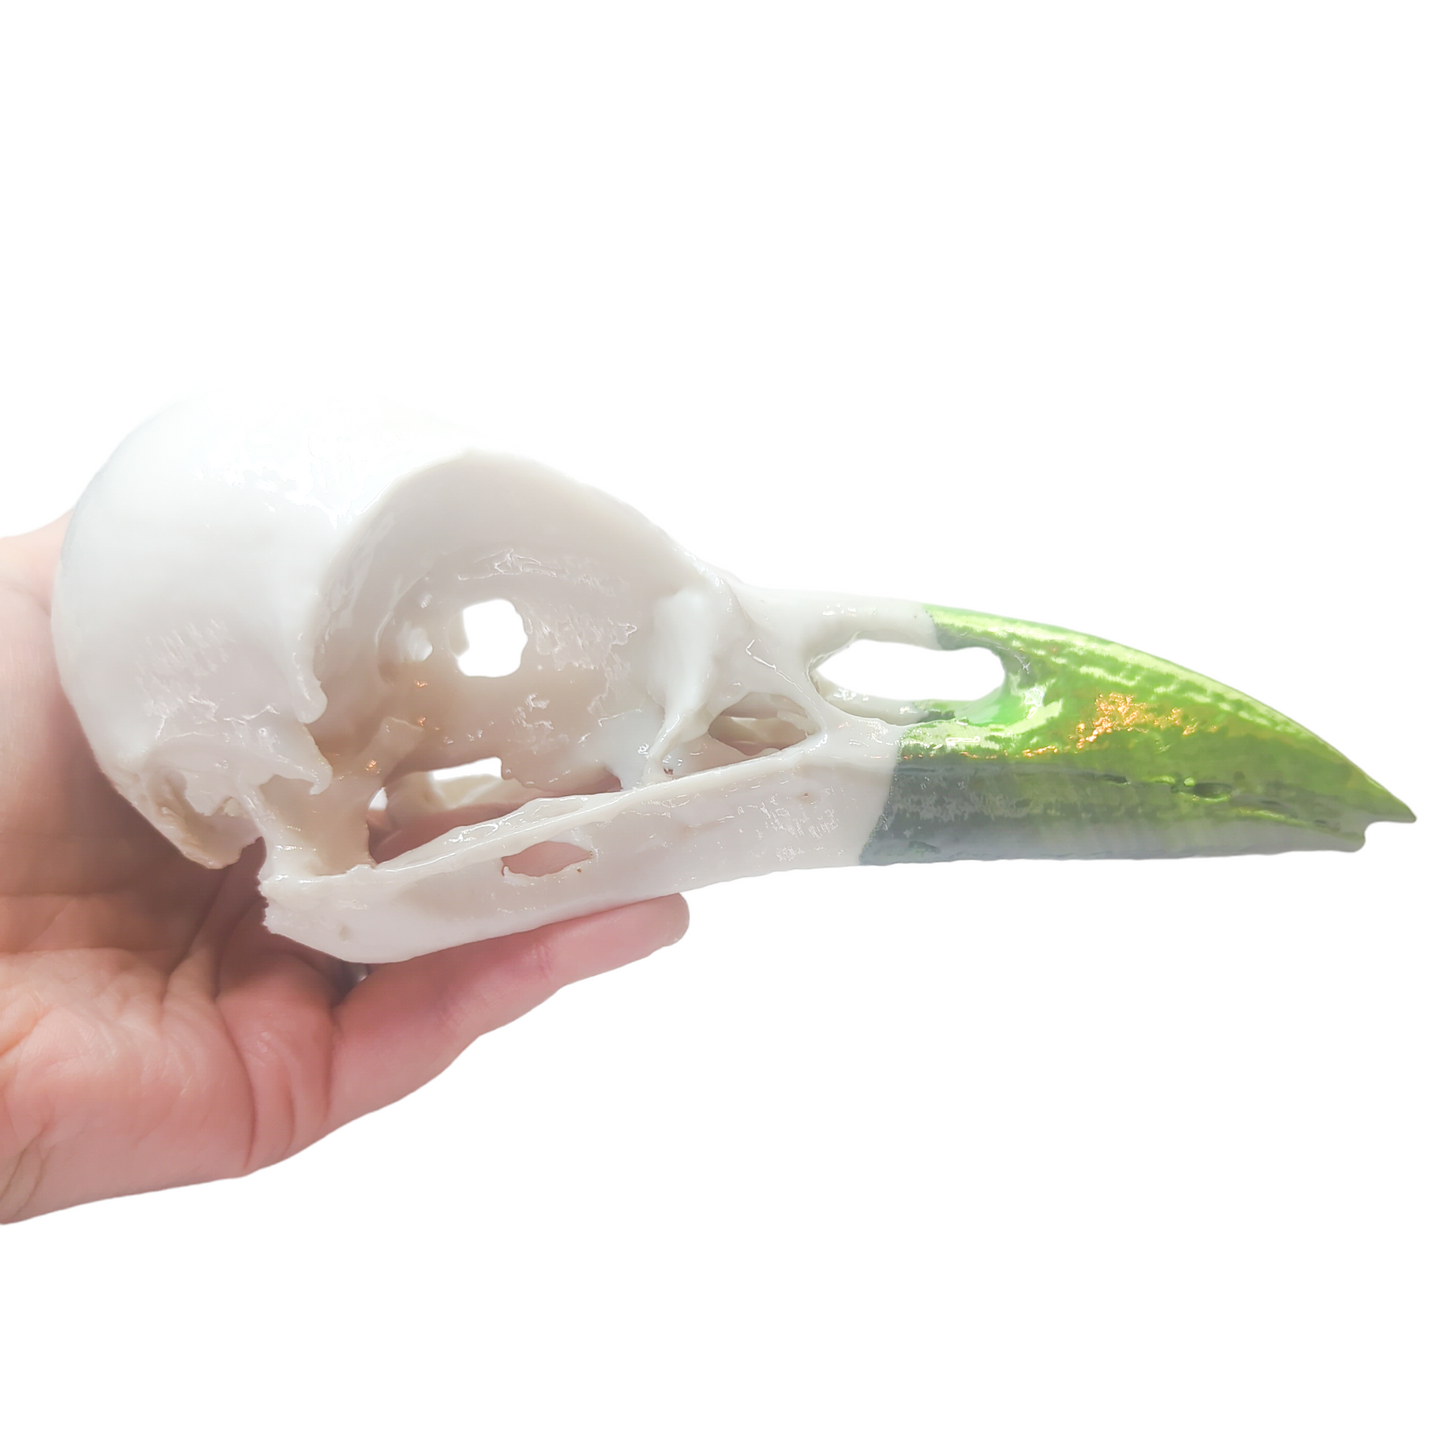 Raven Skull, PLA print, 2-tone white with black/green color shift, unpainted 8" decorative skull with Gloss finish